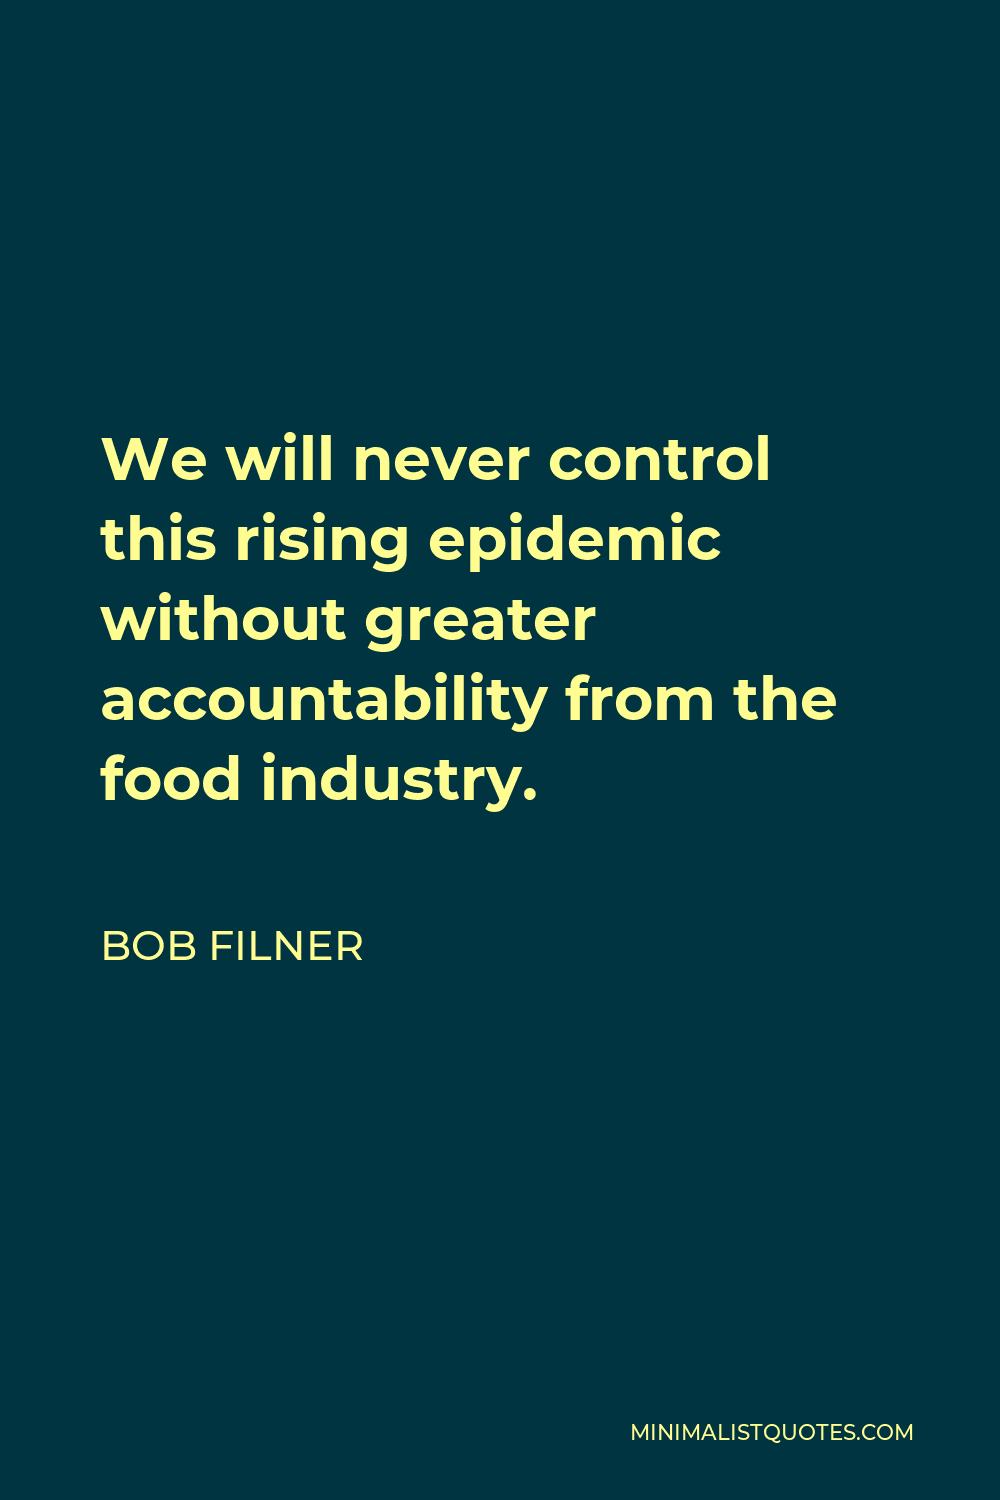 Bob Filner Quote - We will never control this rising epidemic without greater accountability from the food industry.